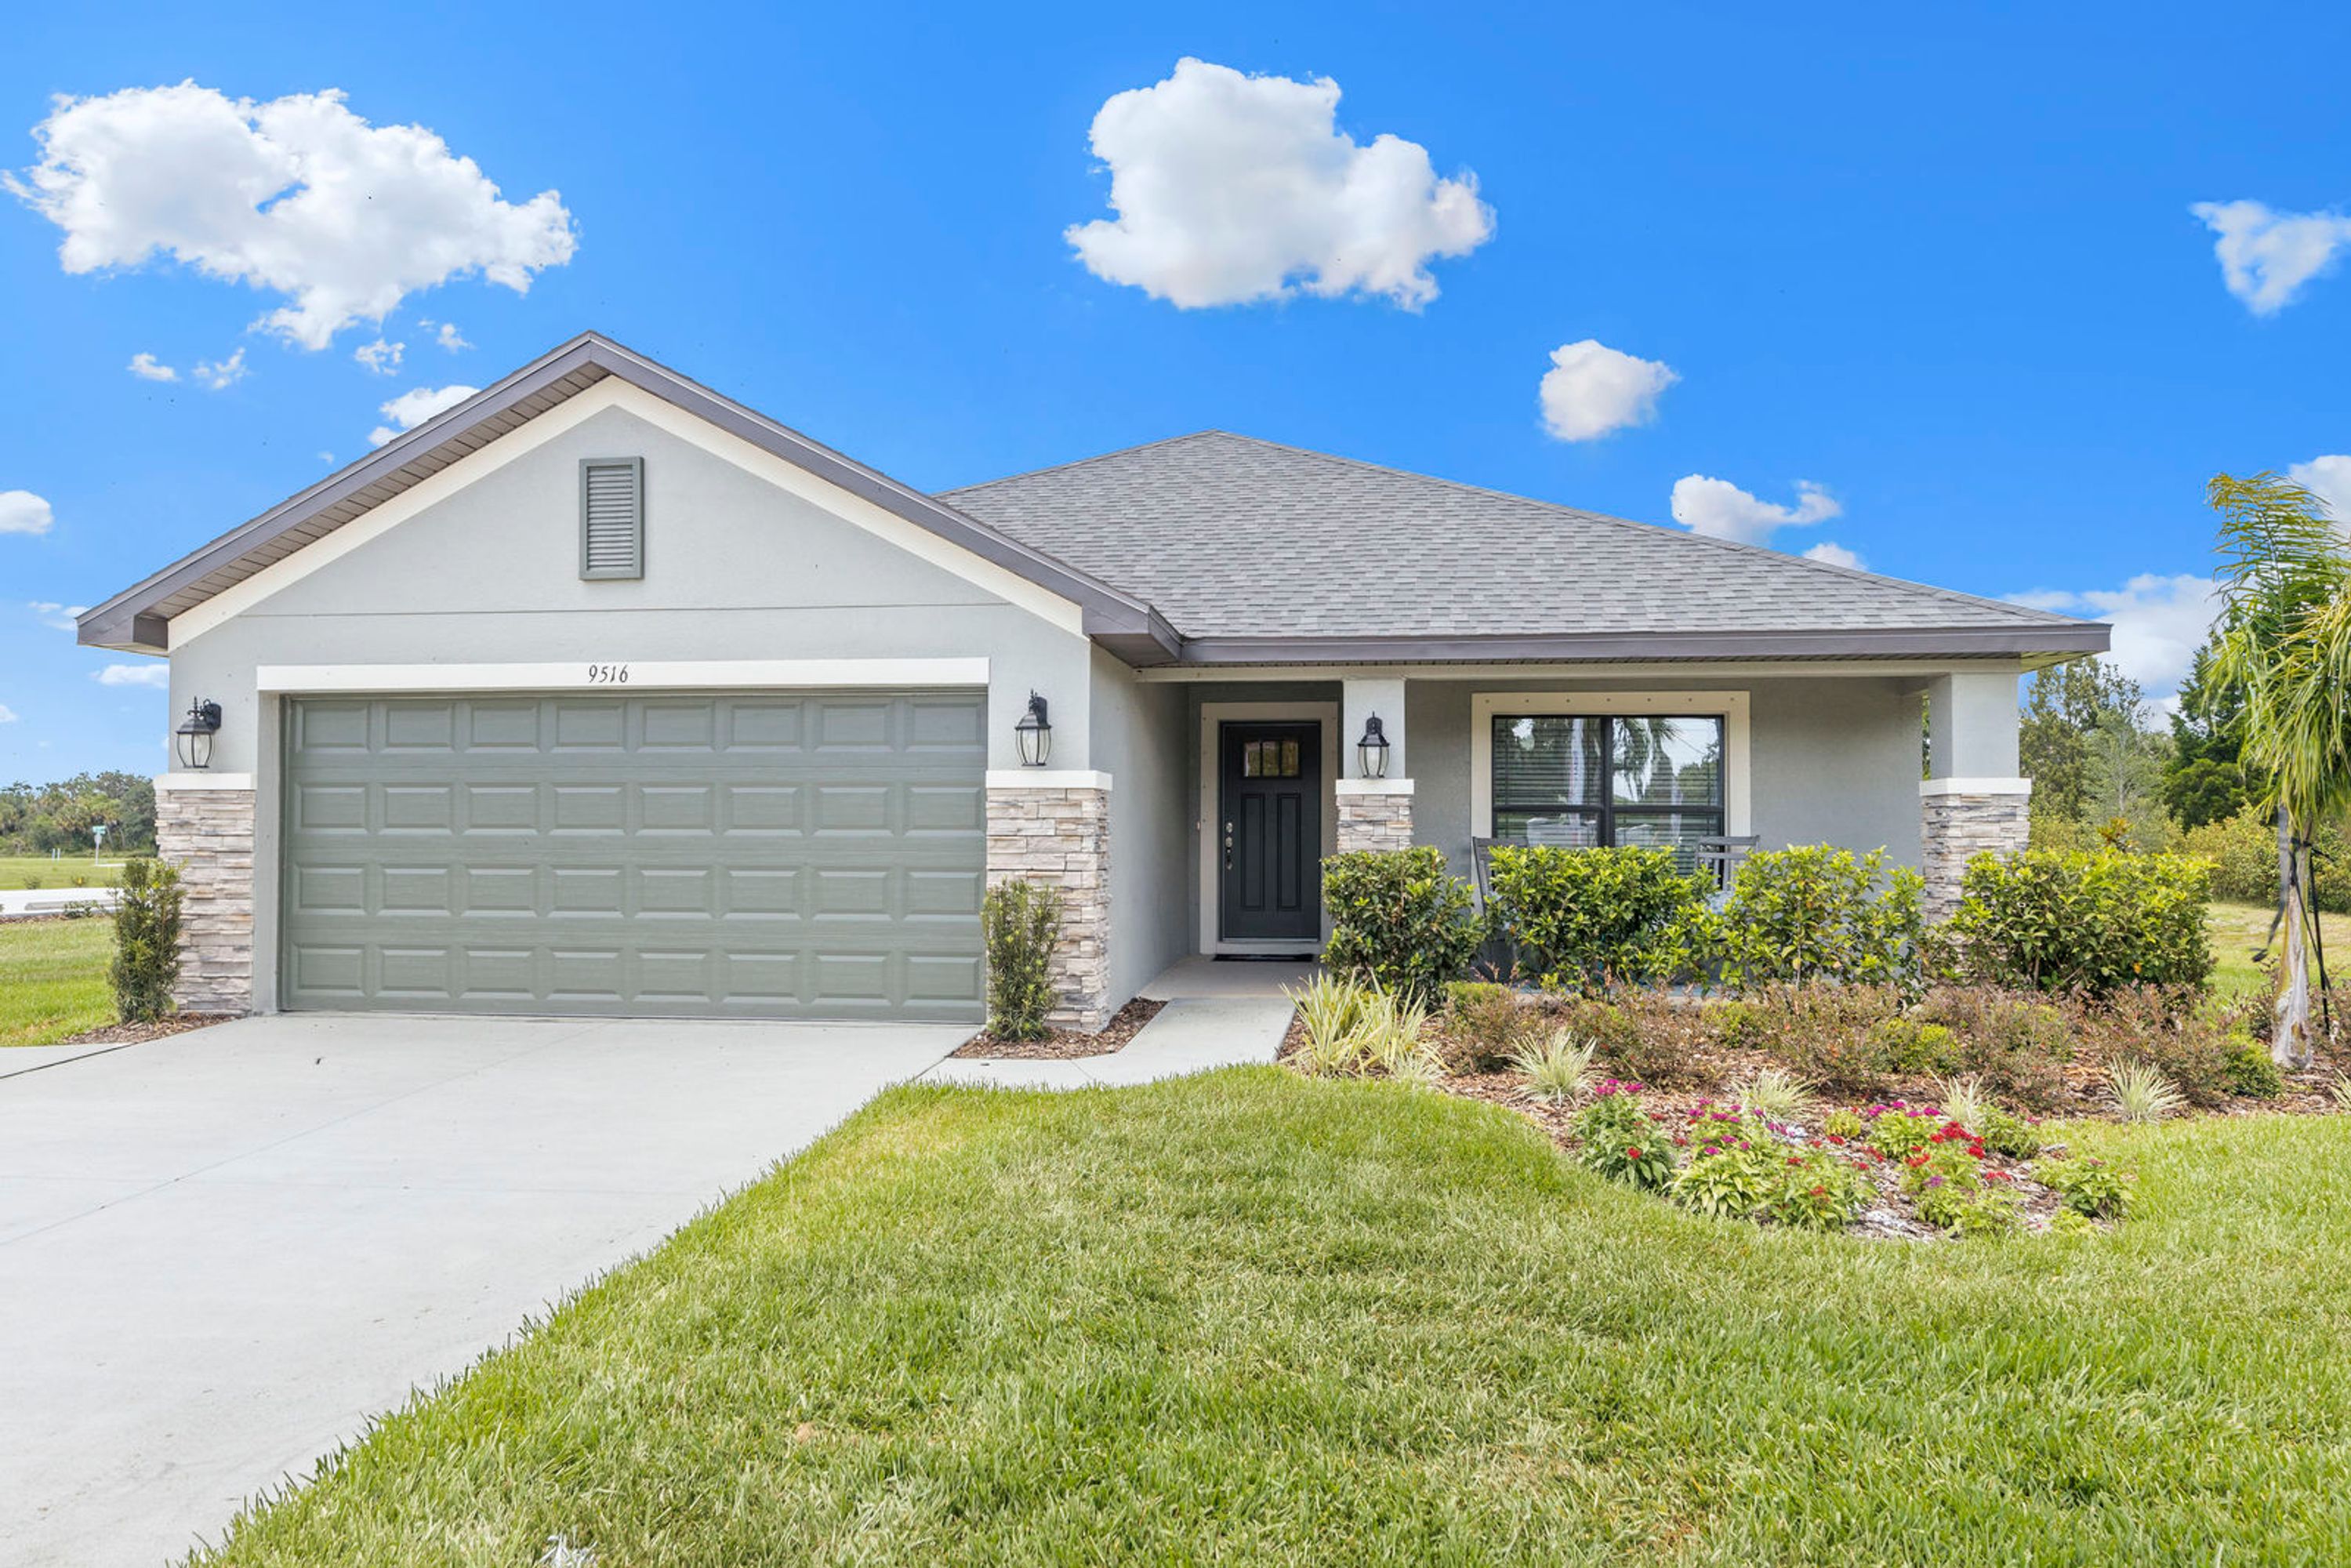 Homes for Sale in Parrish FL - Cross Creek - Medallion Home